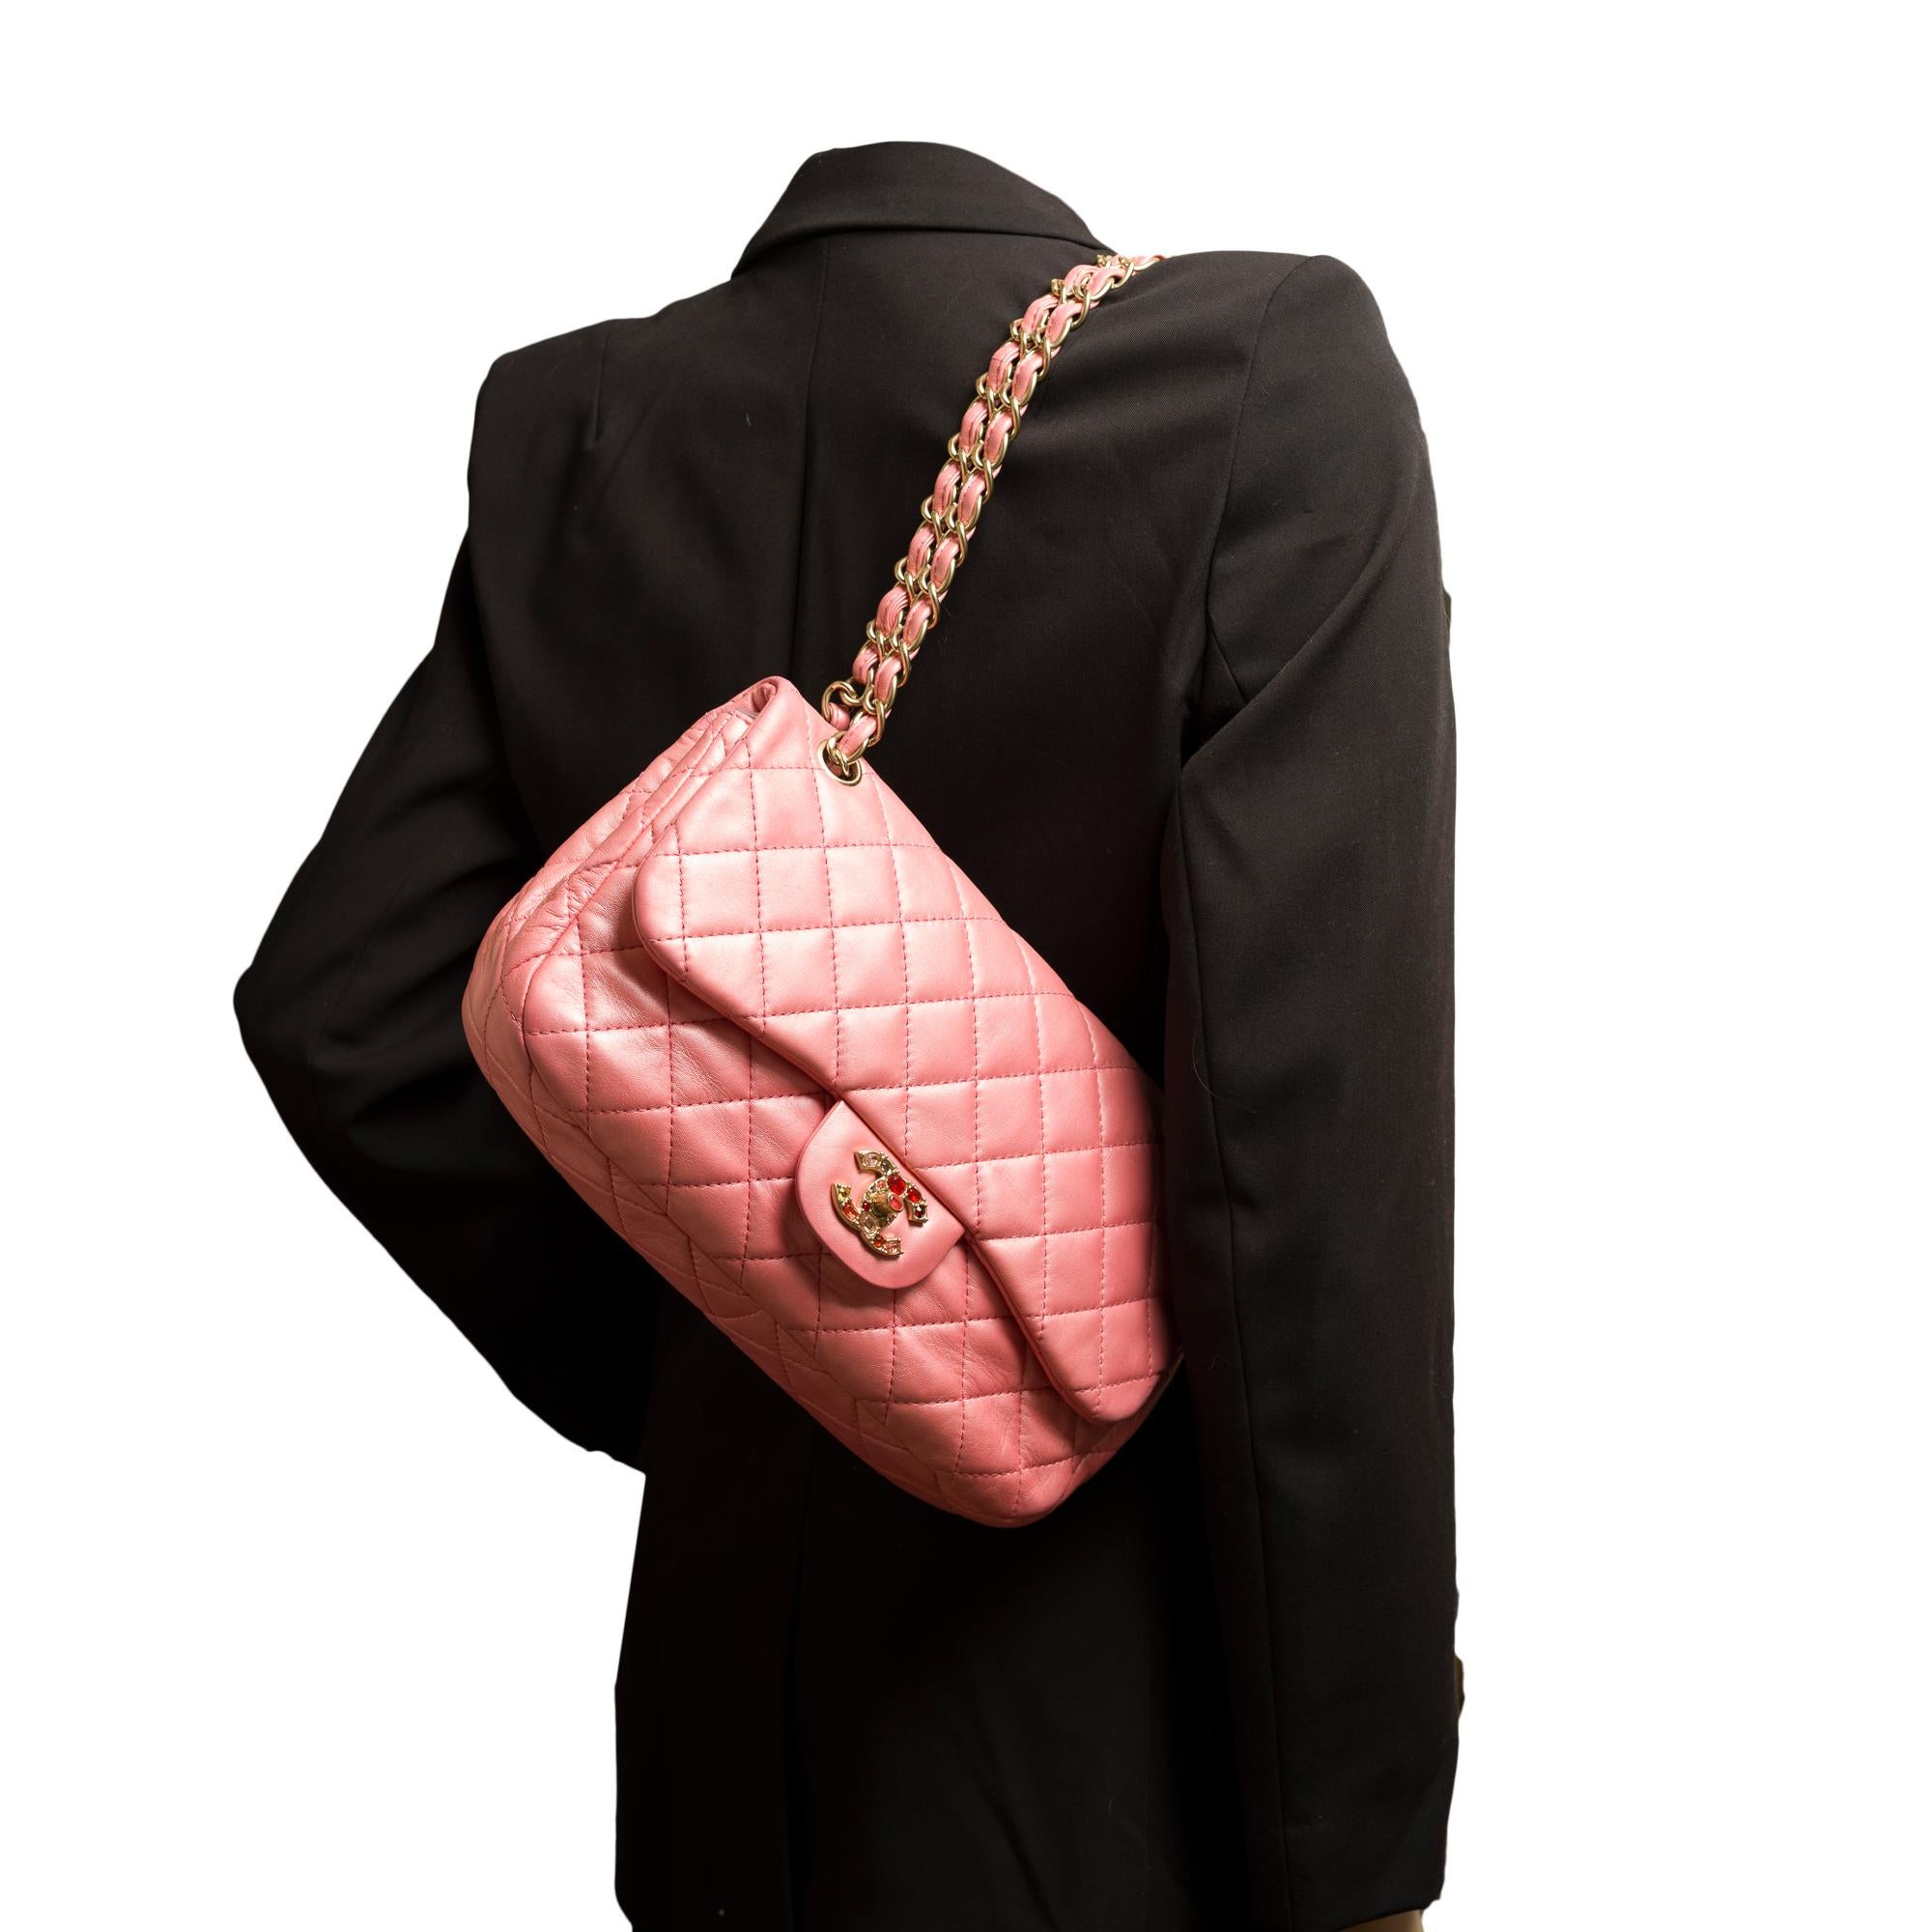 Chanel limited edition shoulder flap bag in Metallic Pink quilted leather, MGHW For Sale 6